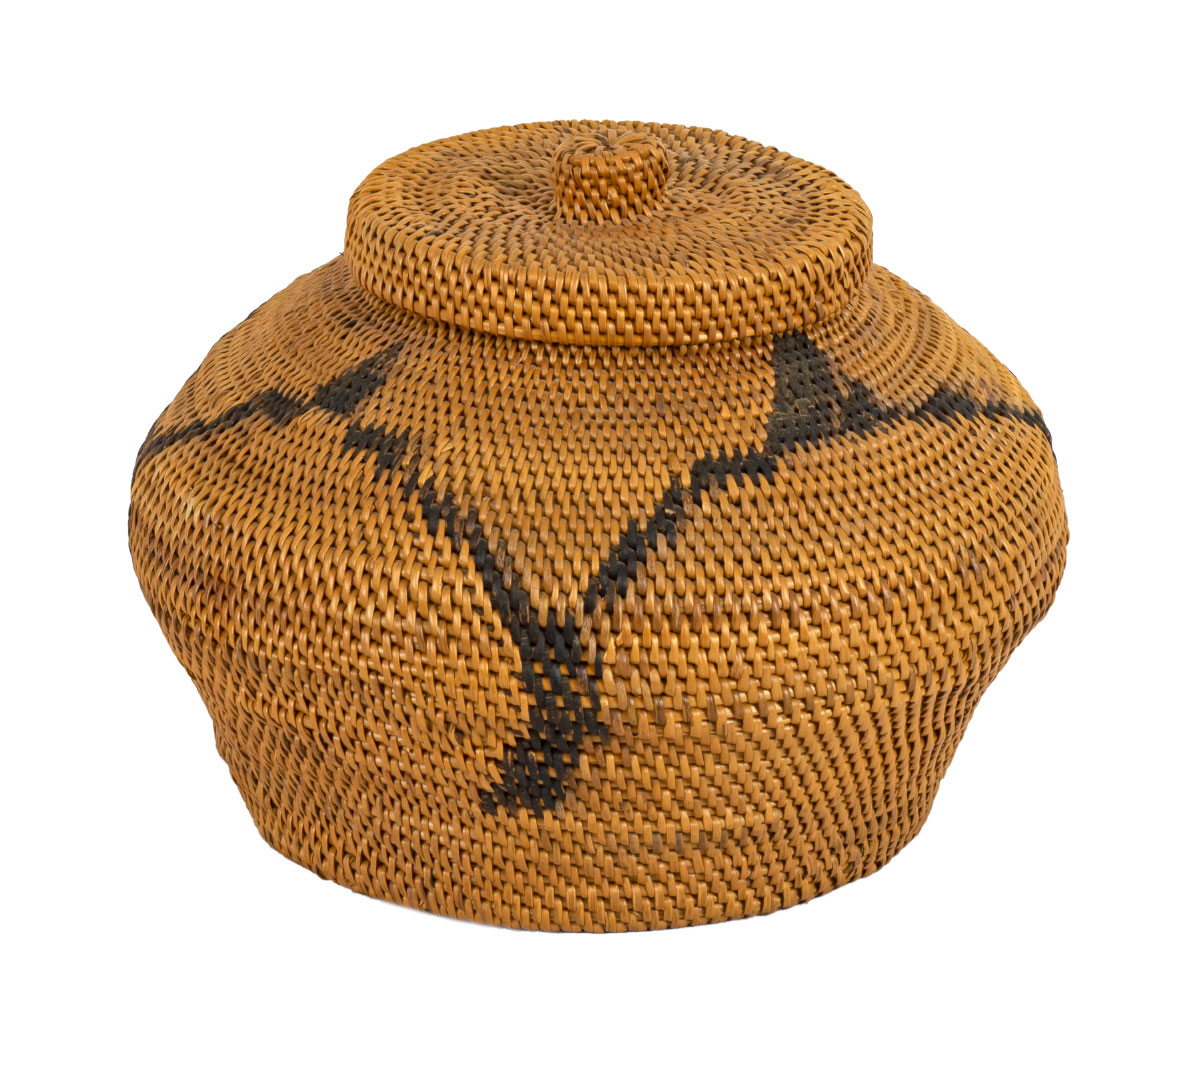 MAIDU BASKET WITH LID Title  3a95ca